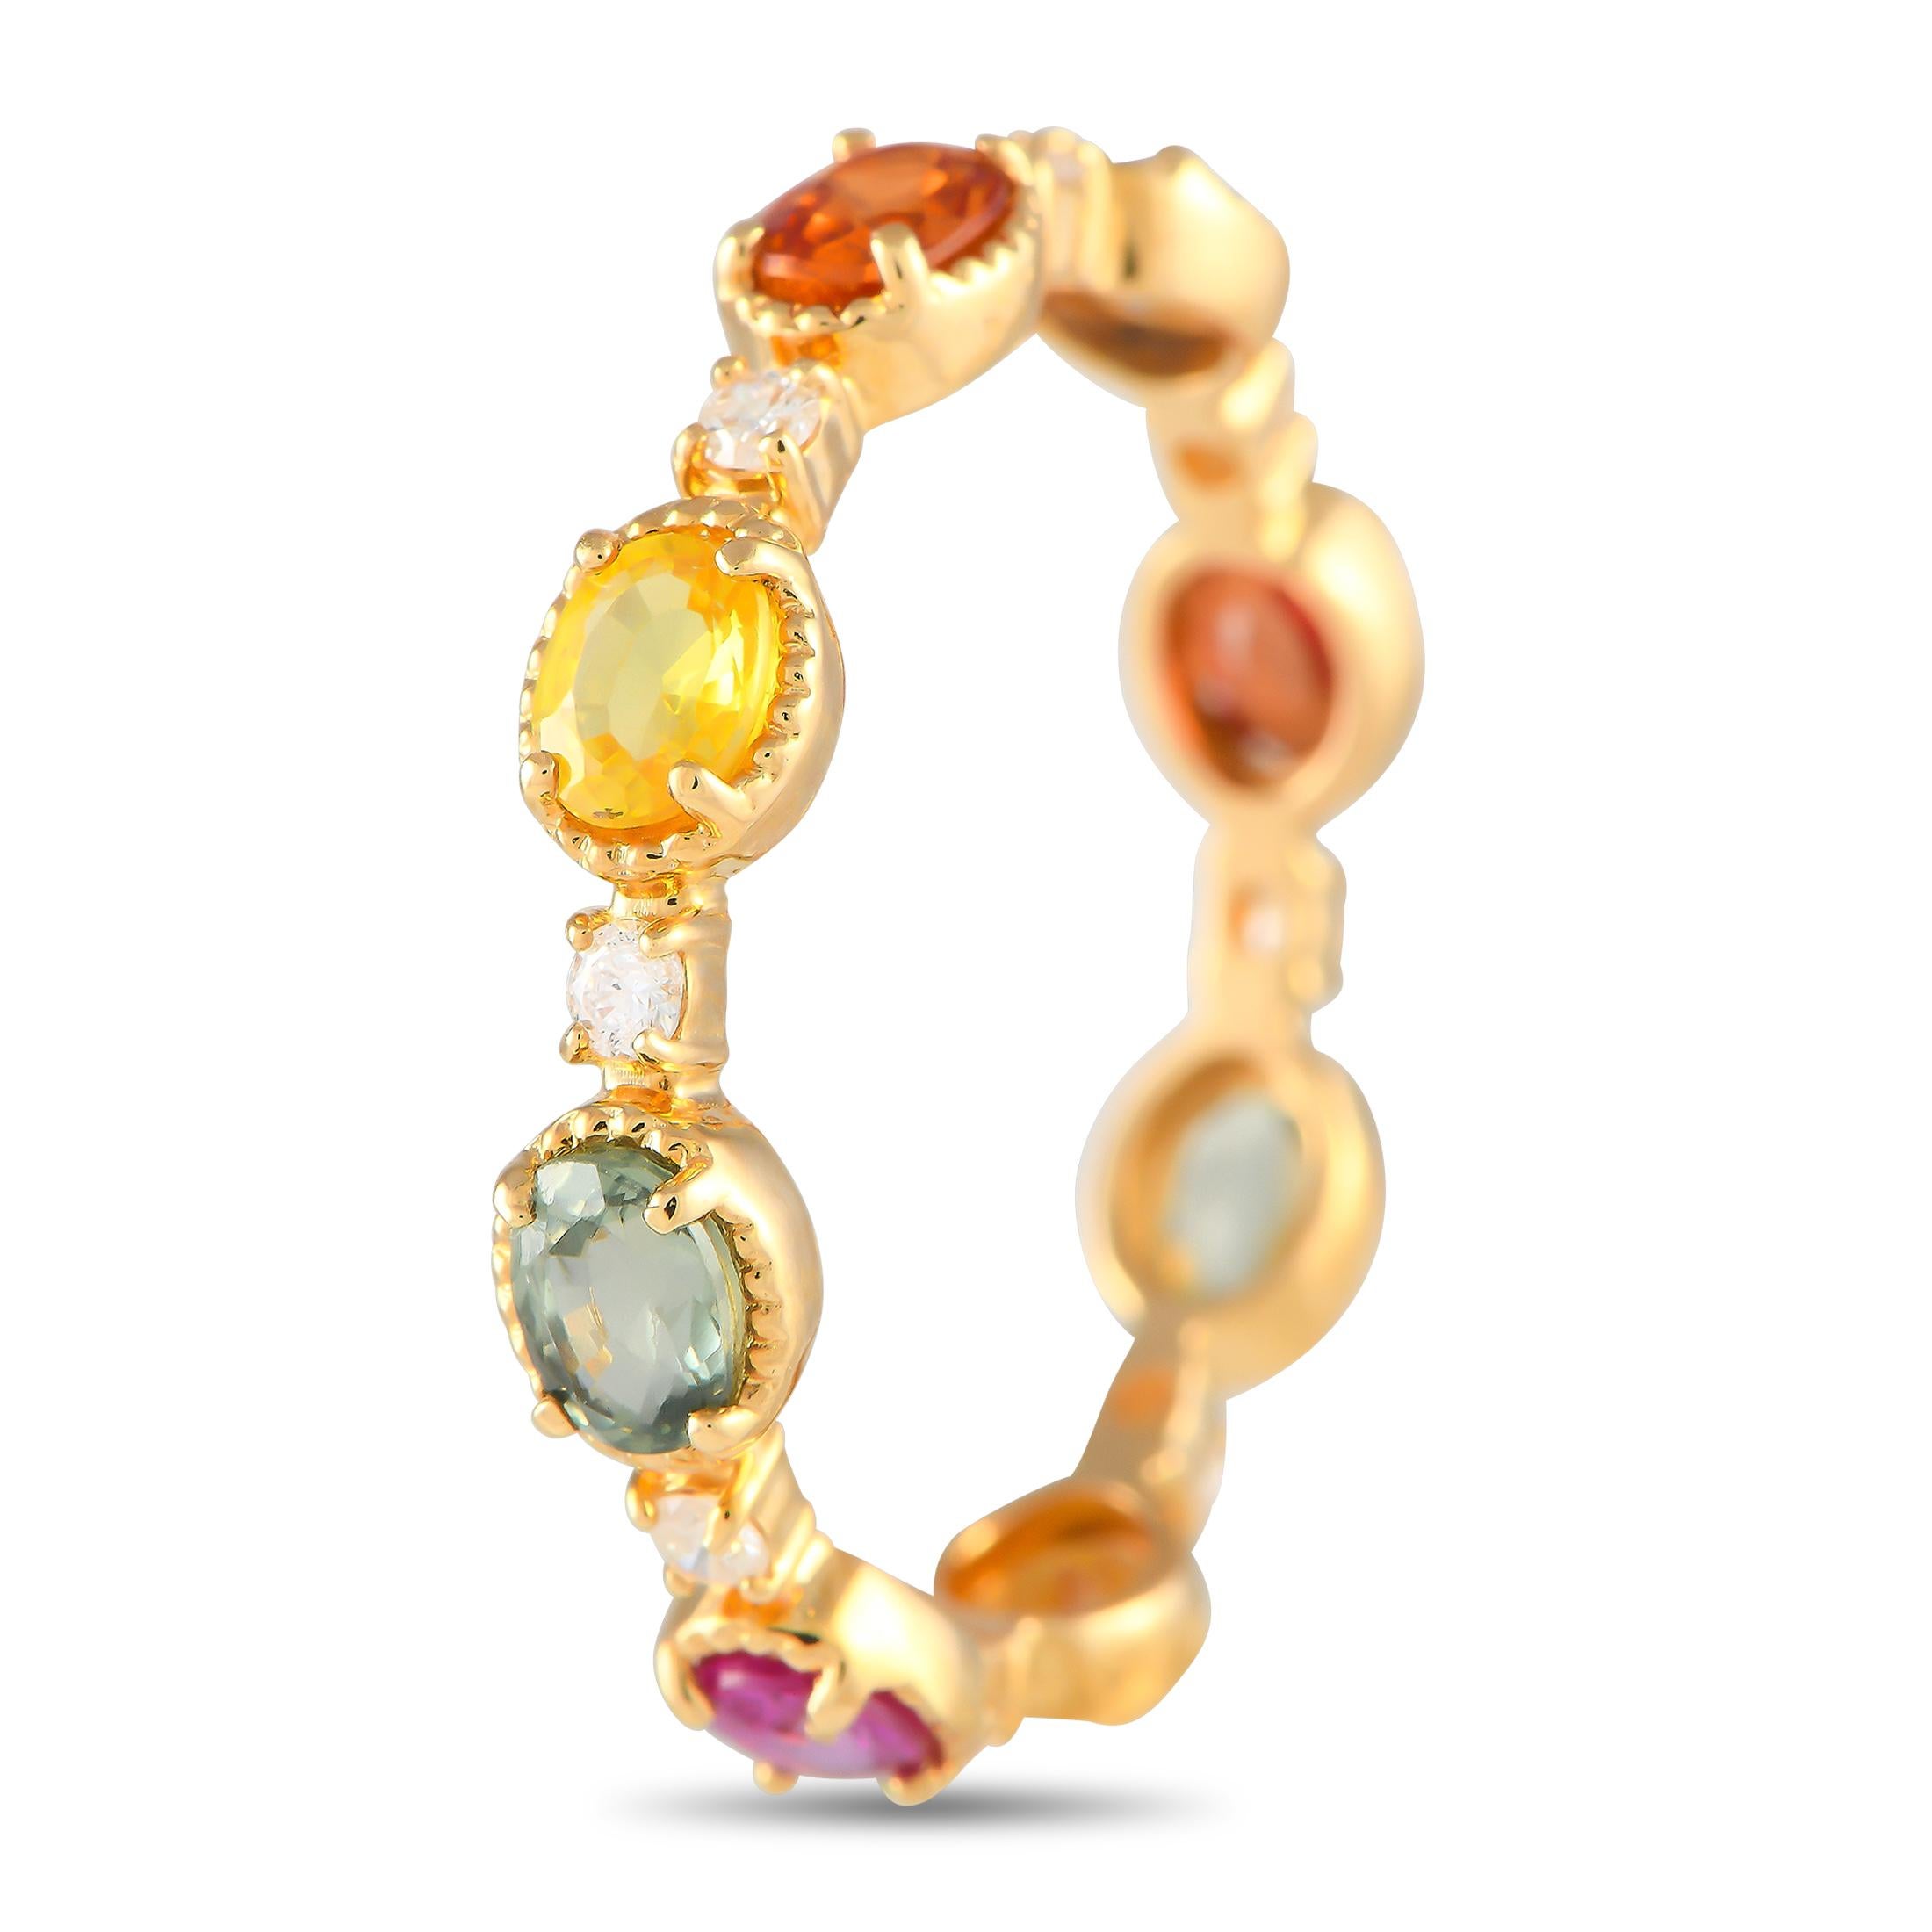 Warm-toned multicolored sapphires with a total weight of 1.75 carats beautifully elevate this rings understated 18K yellow gold setting. Diamonds with a total weight of 0.16 carats add a touch of sparkle to this unforgettable accessory. It features